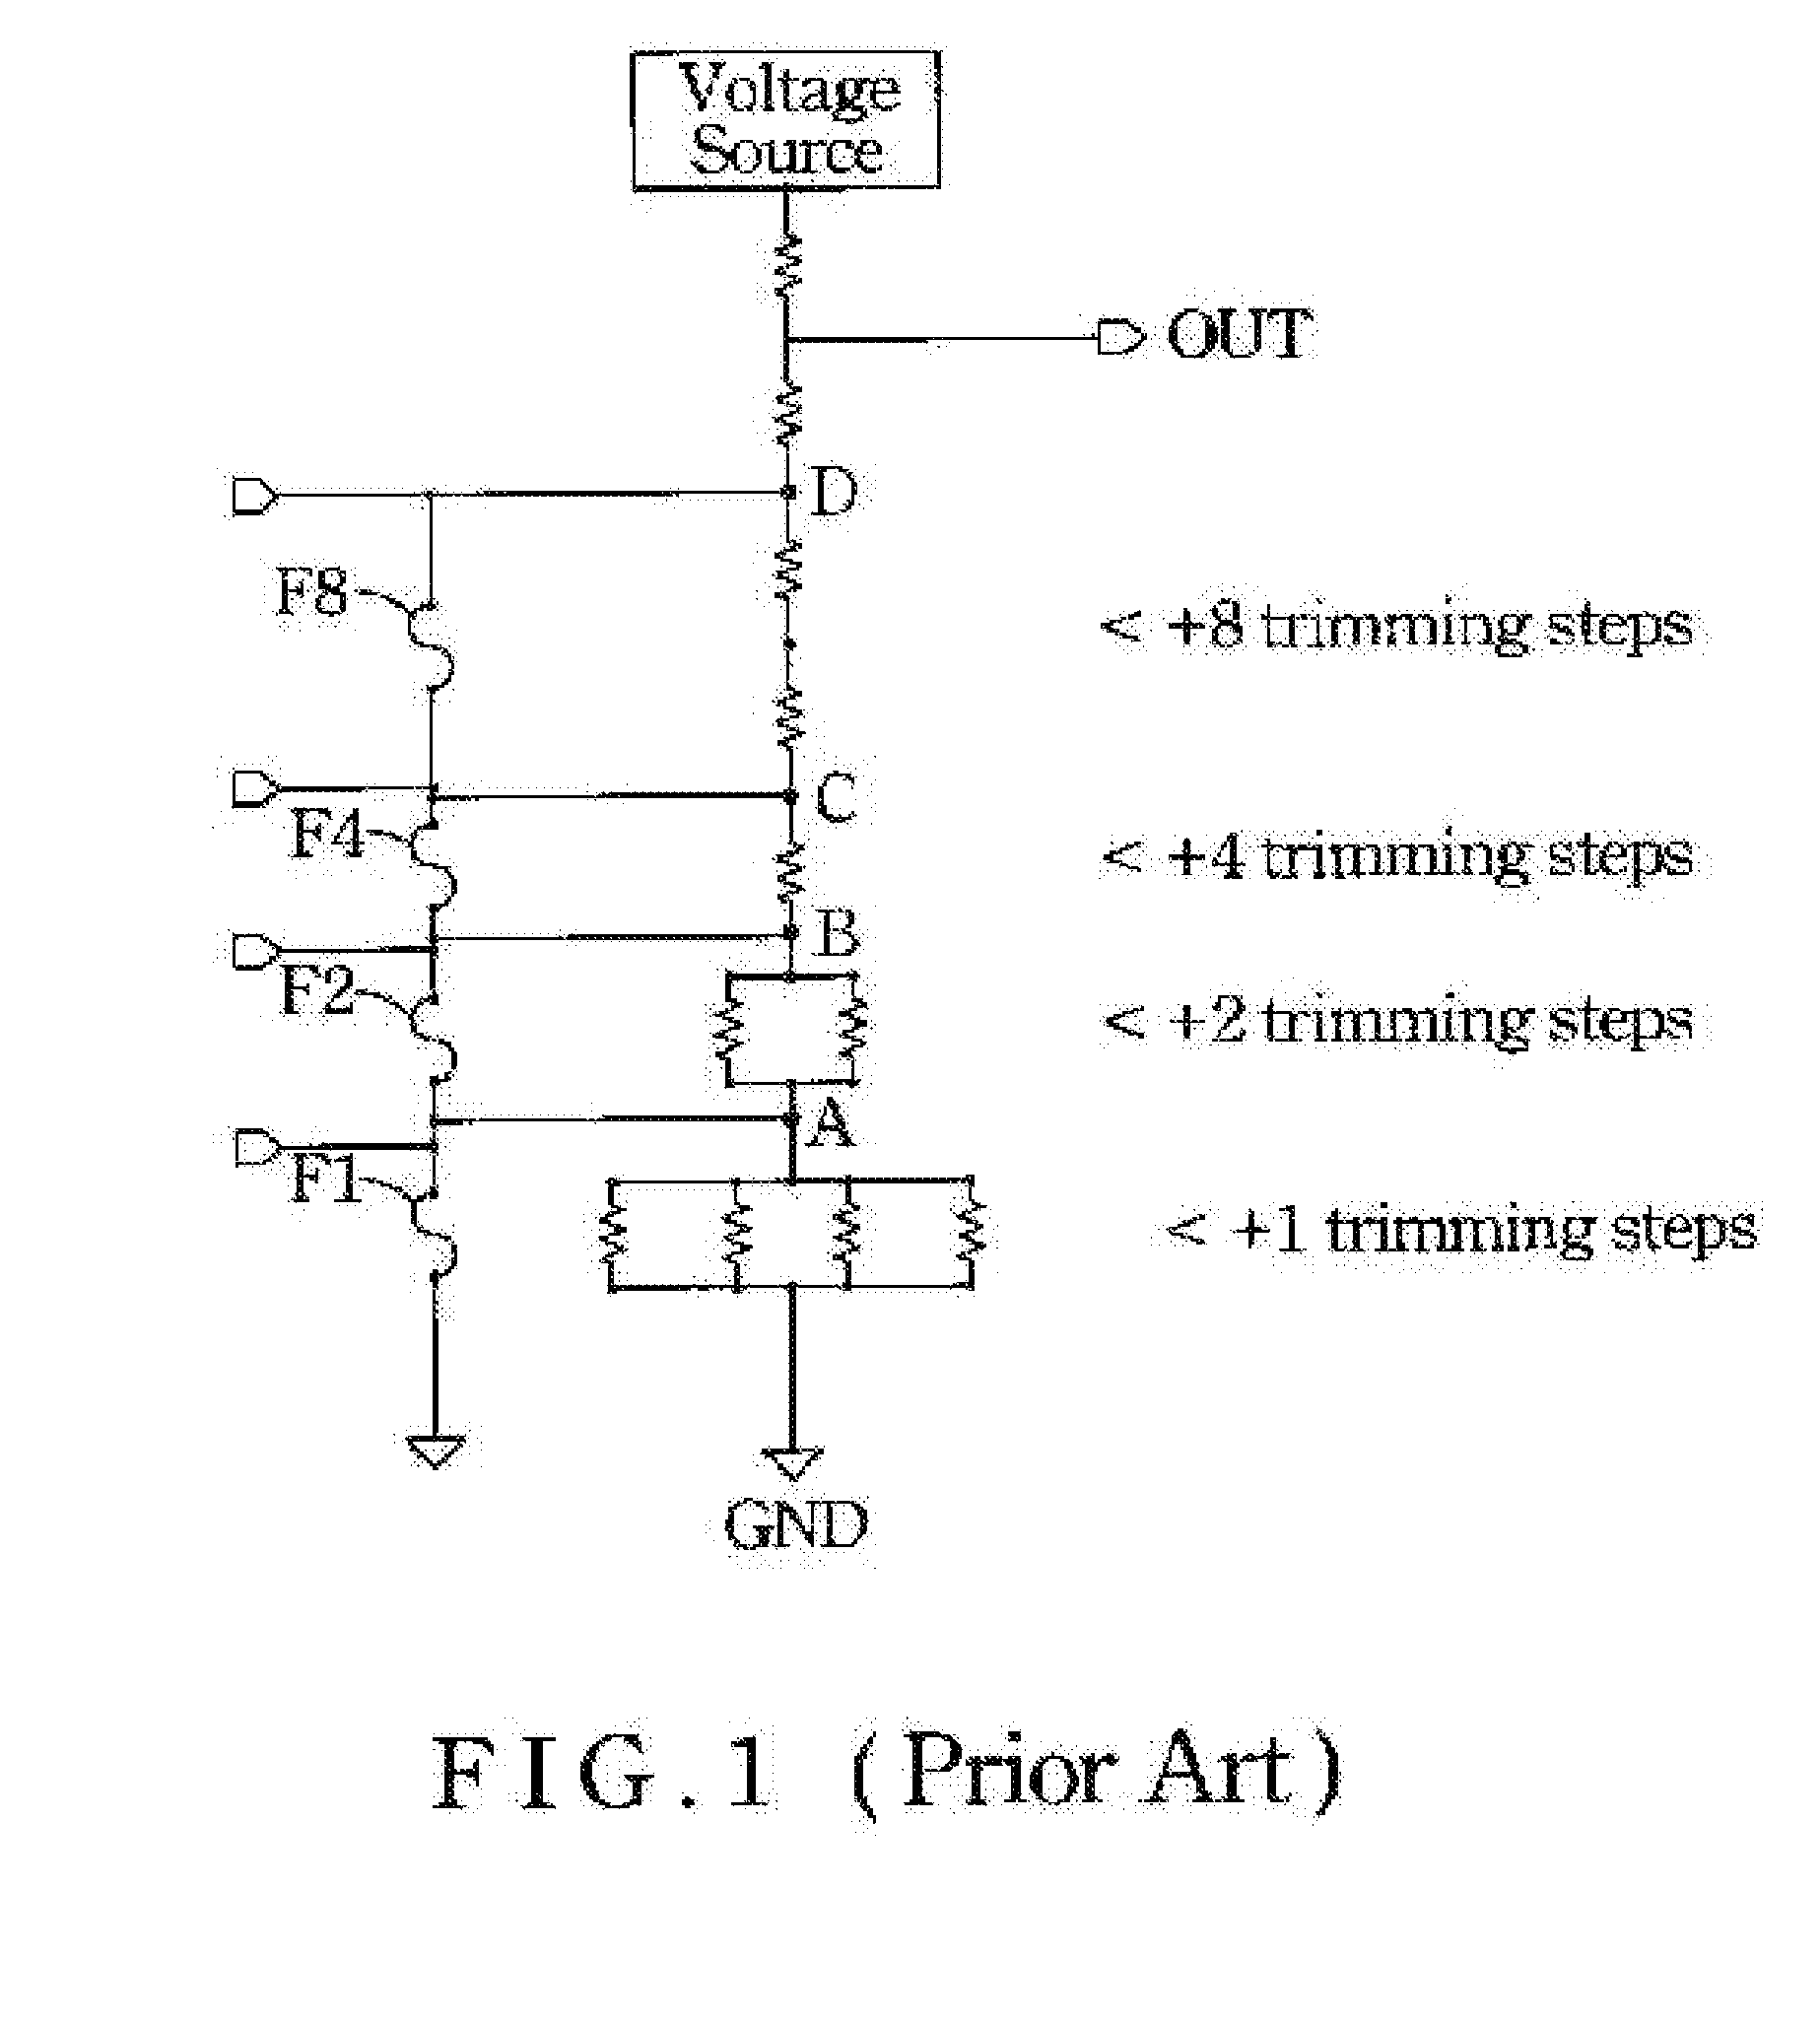 Circuit for Adjusting Reference Voltage Using Fuse Trimming